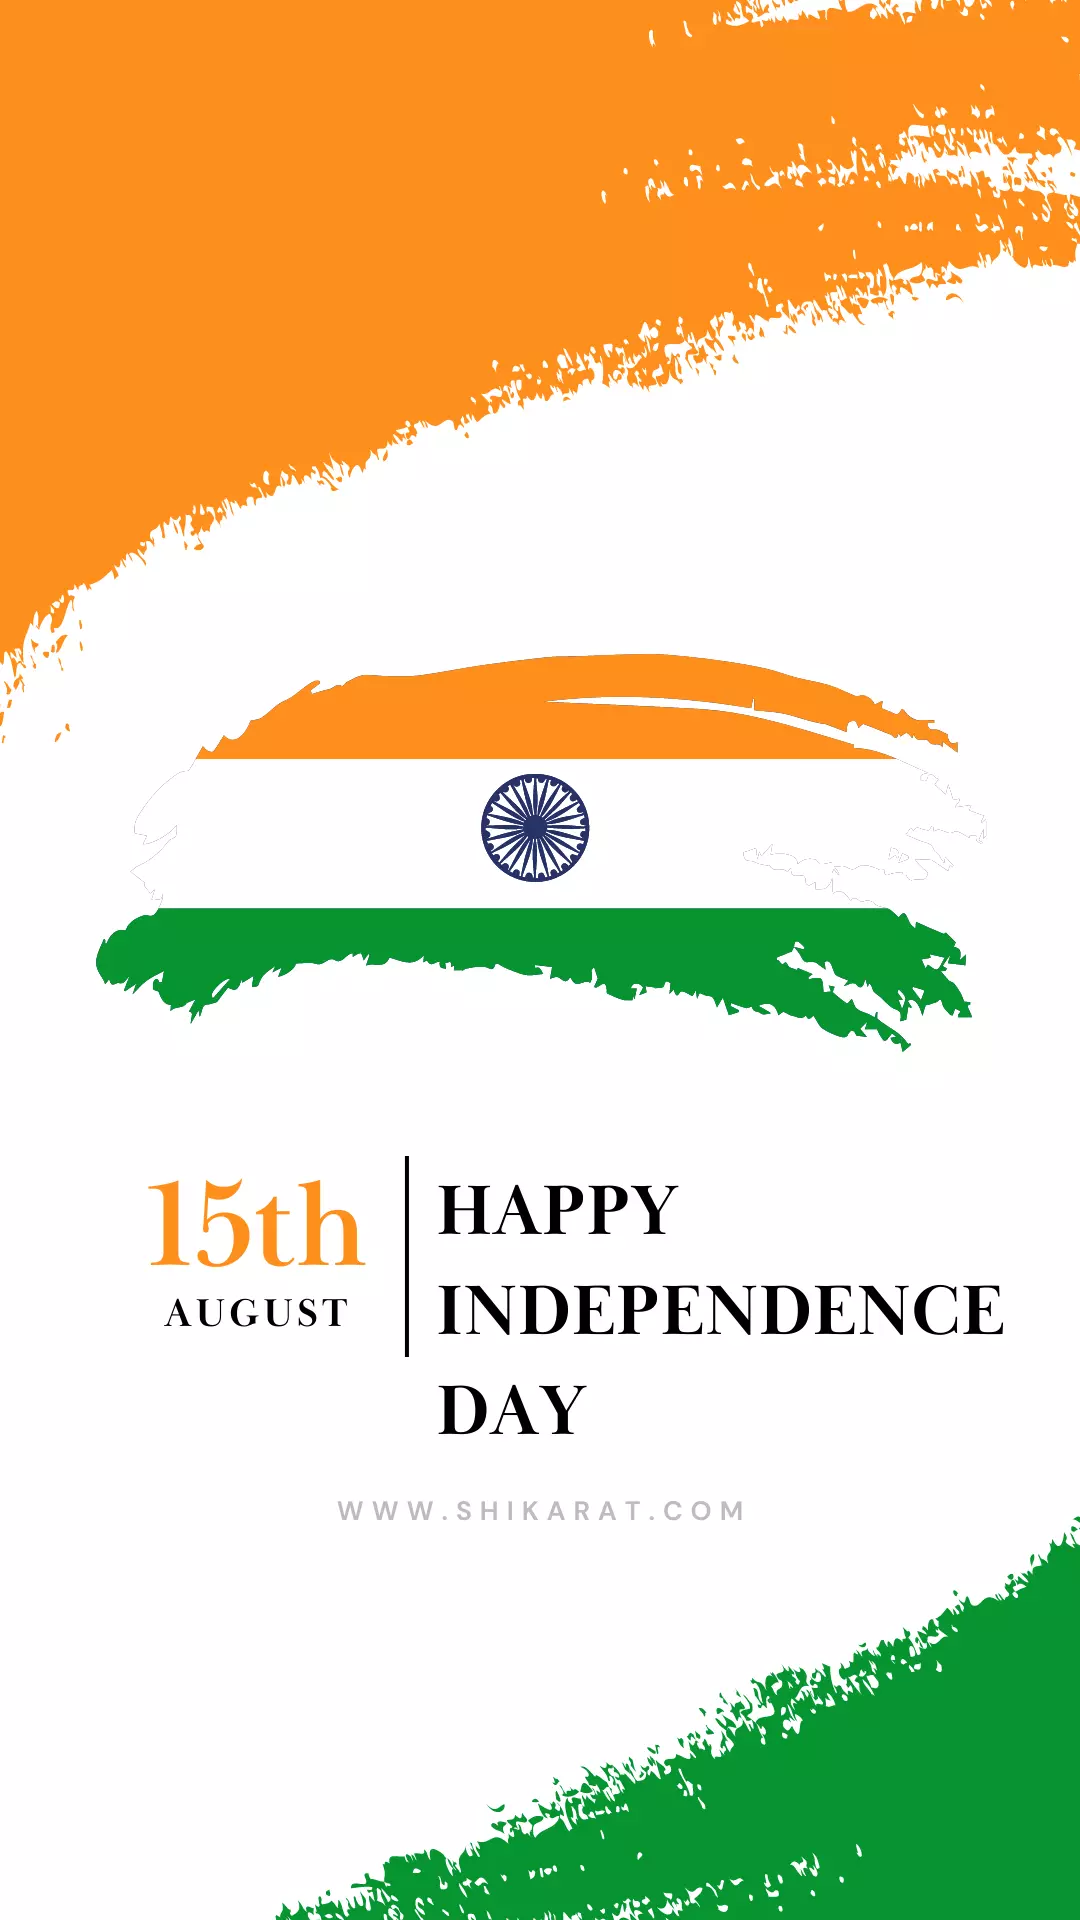 Independence Day wishes